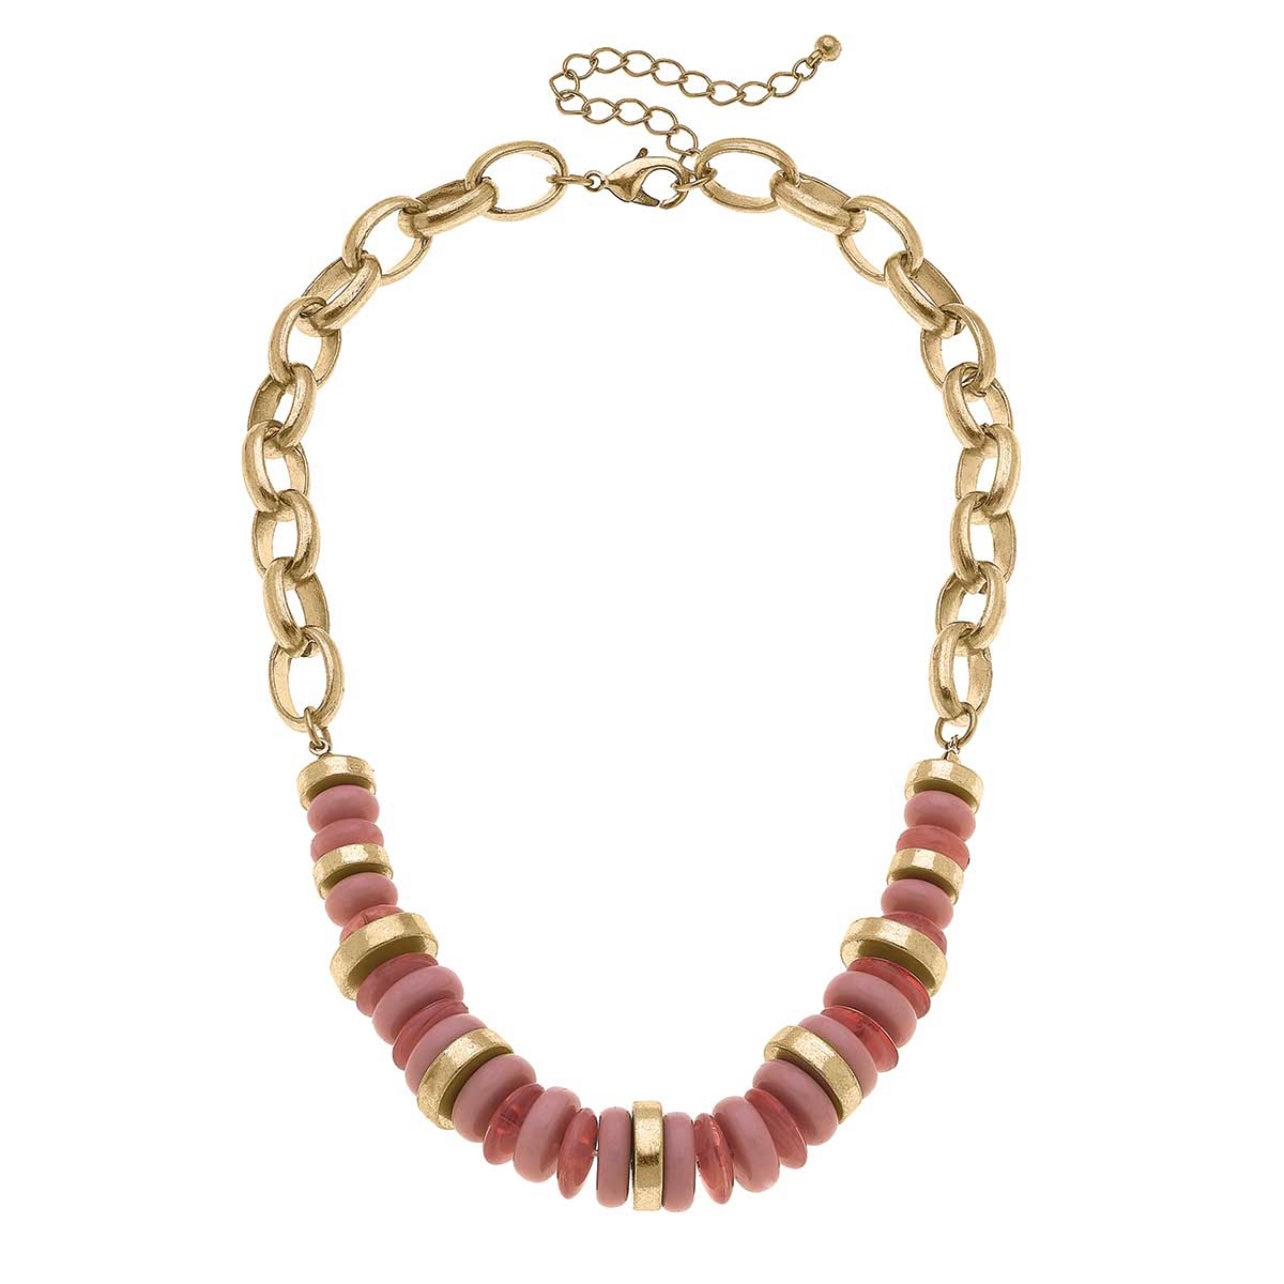 Blush Beaded Chain Link Necklace